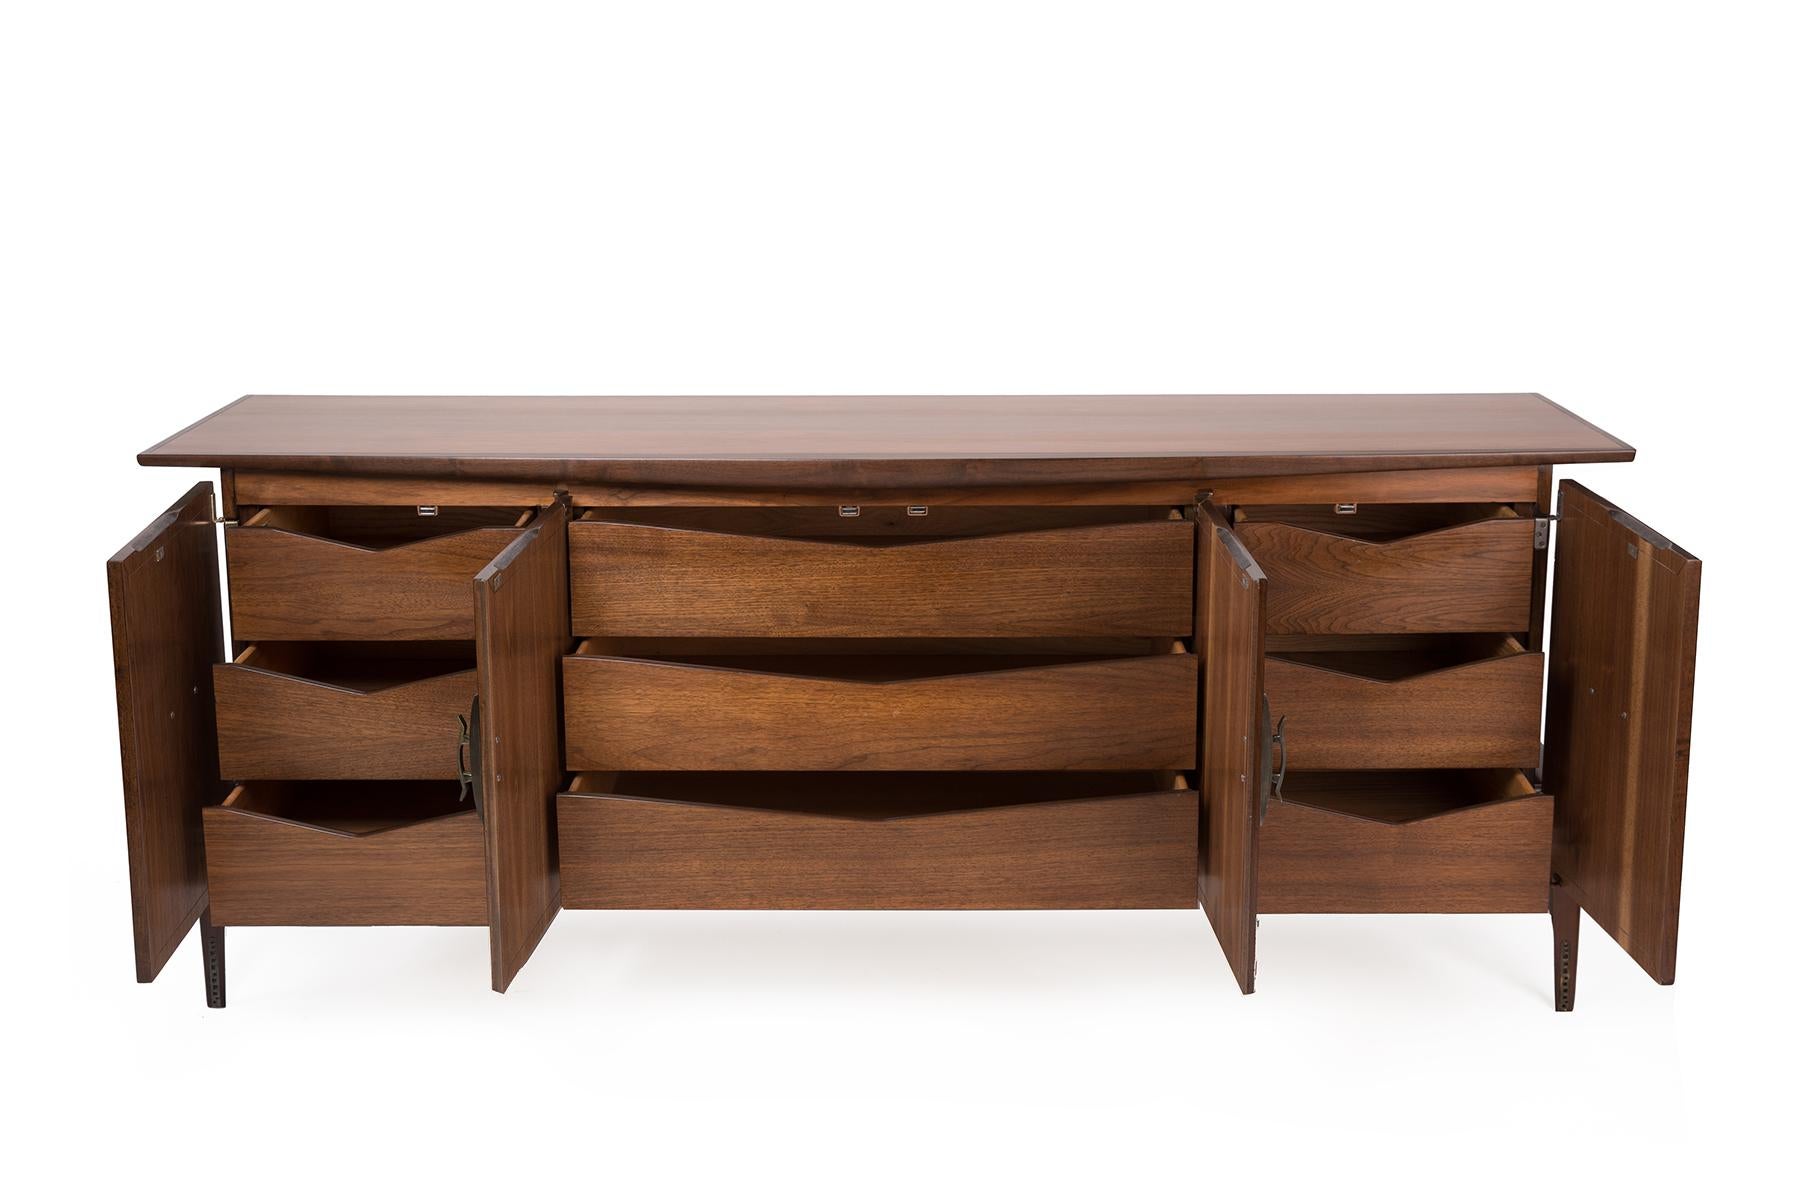 Newly finished walnut credenza by Helen Hobey for Baker. This example features formed bronze pulls, sculptural forms and plenty of interior storage. We also have a matching set of nightstands available.